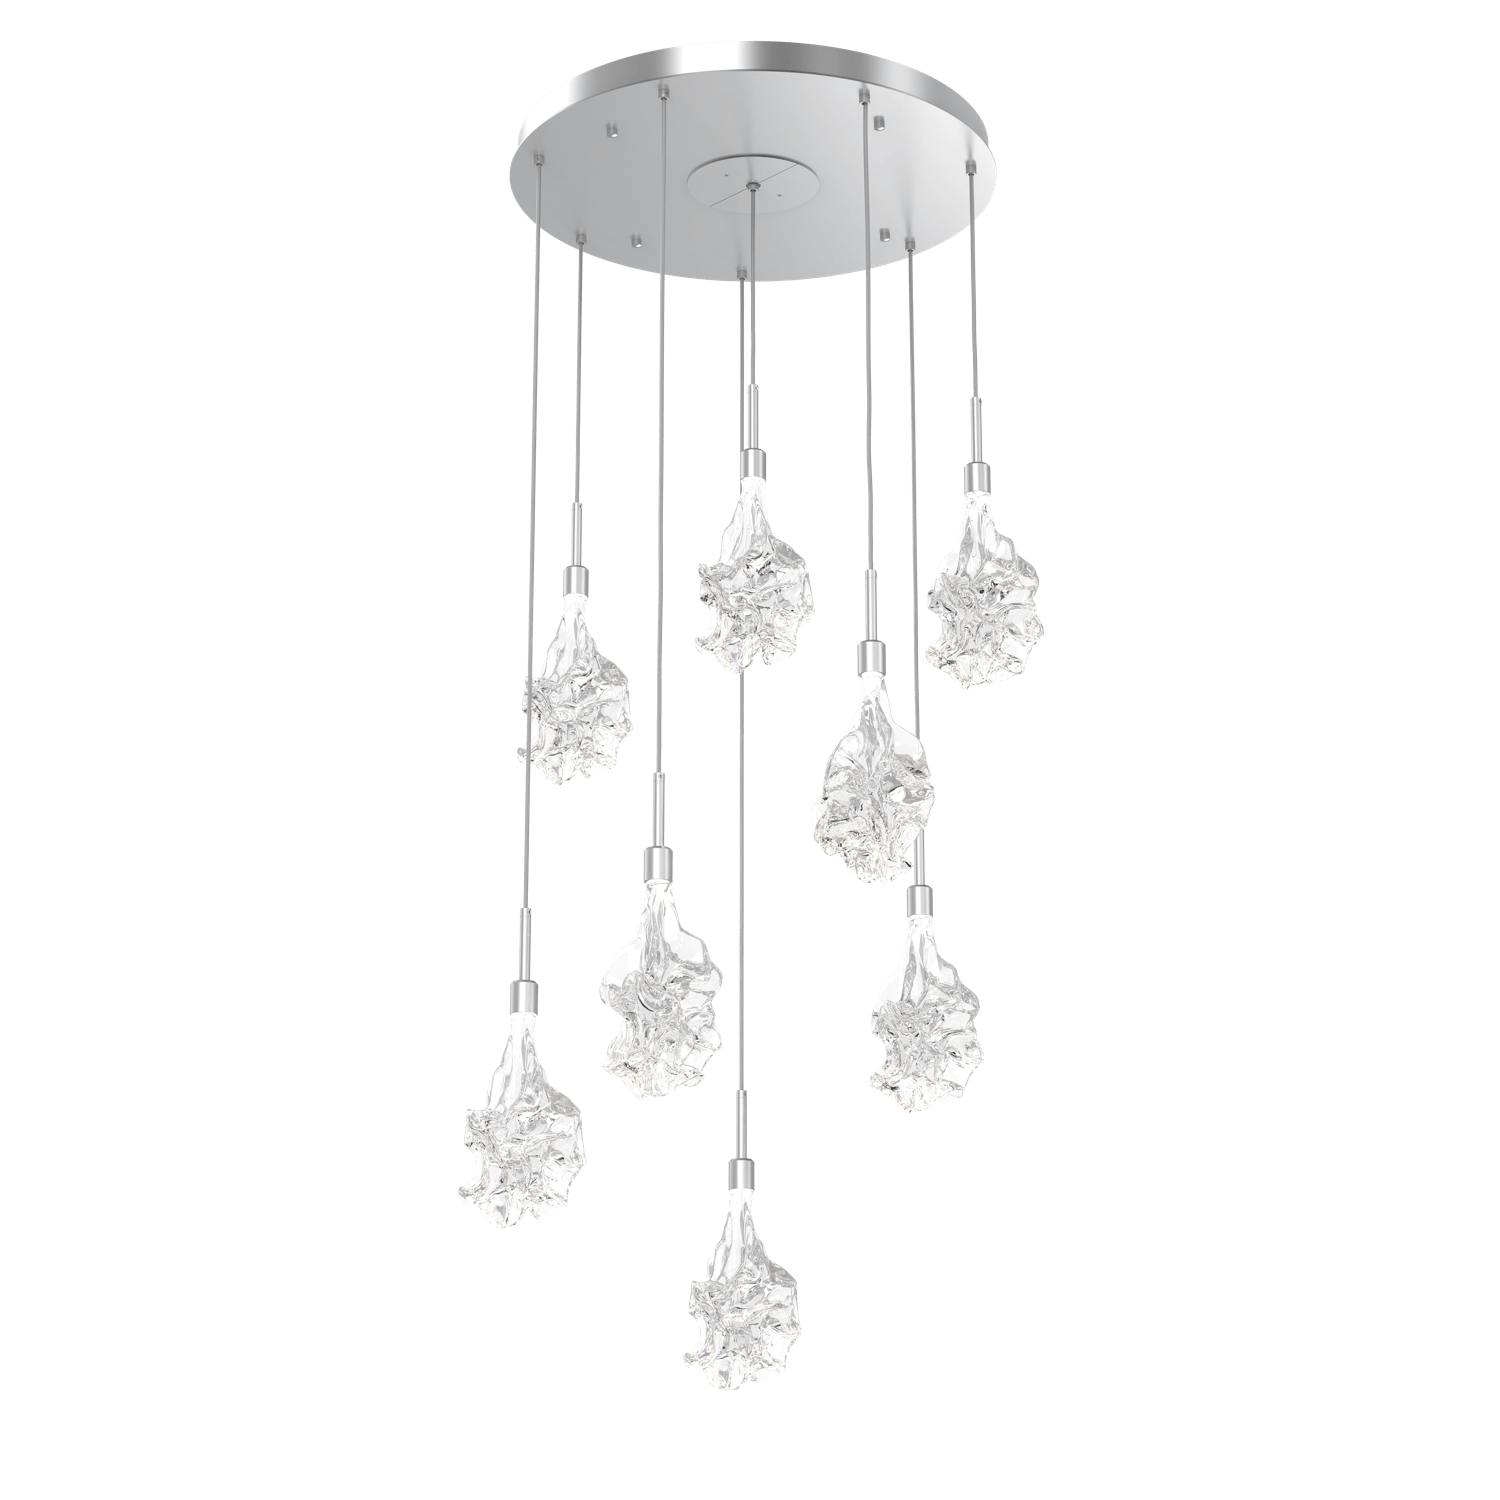 CHB0059-08-CS-Hammerton-Studio-Blossom-8-light-round-pendant-chandelier-with-classic-silver-finish-and-clear-handblown-crystal-glass-shades-and-LED-lamping